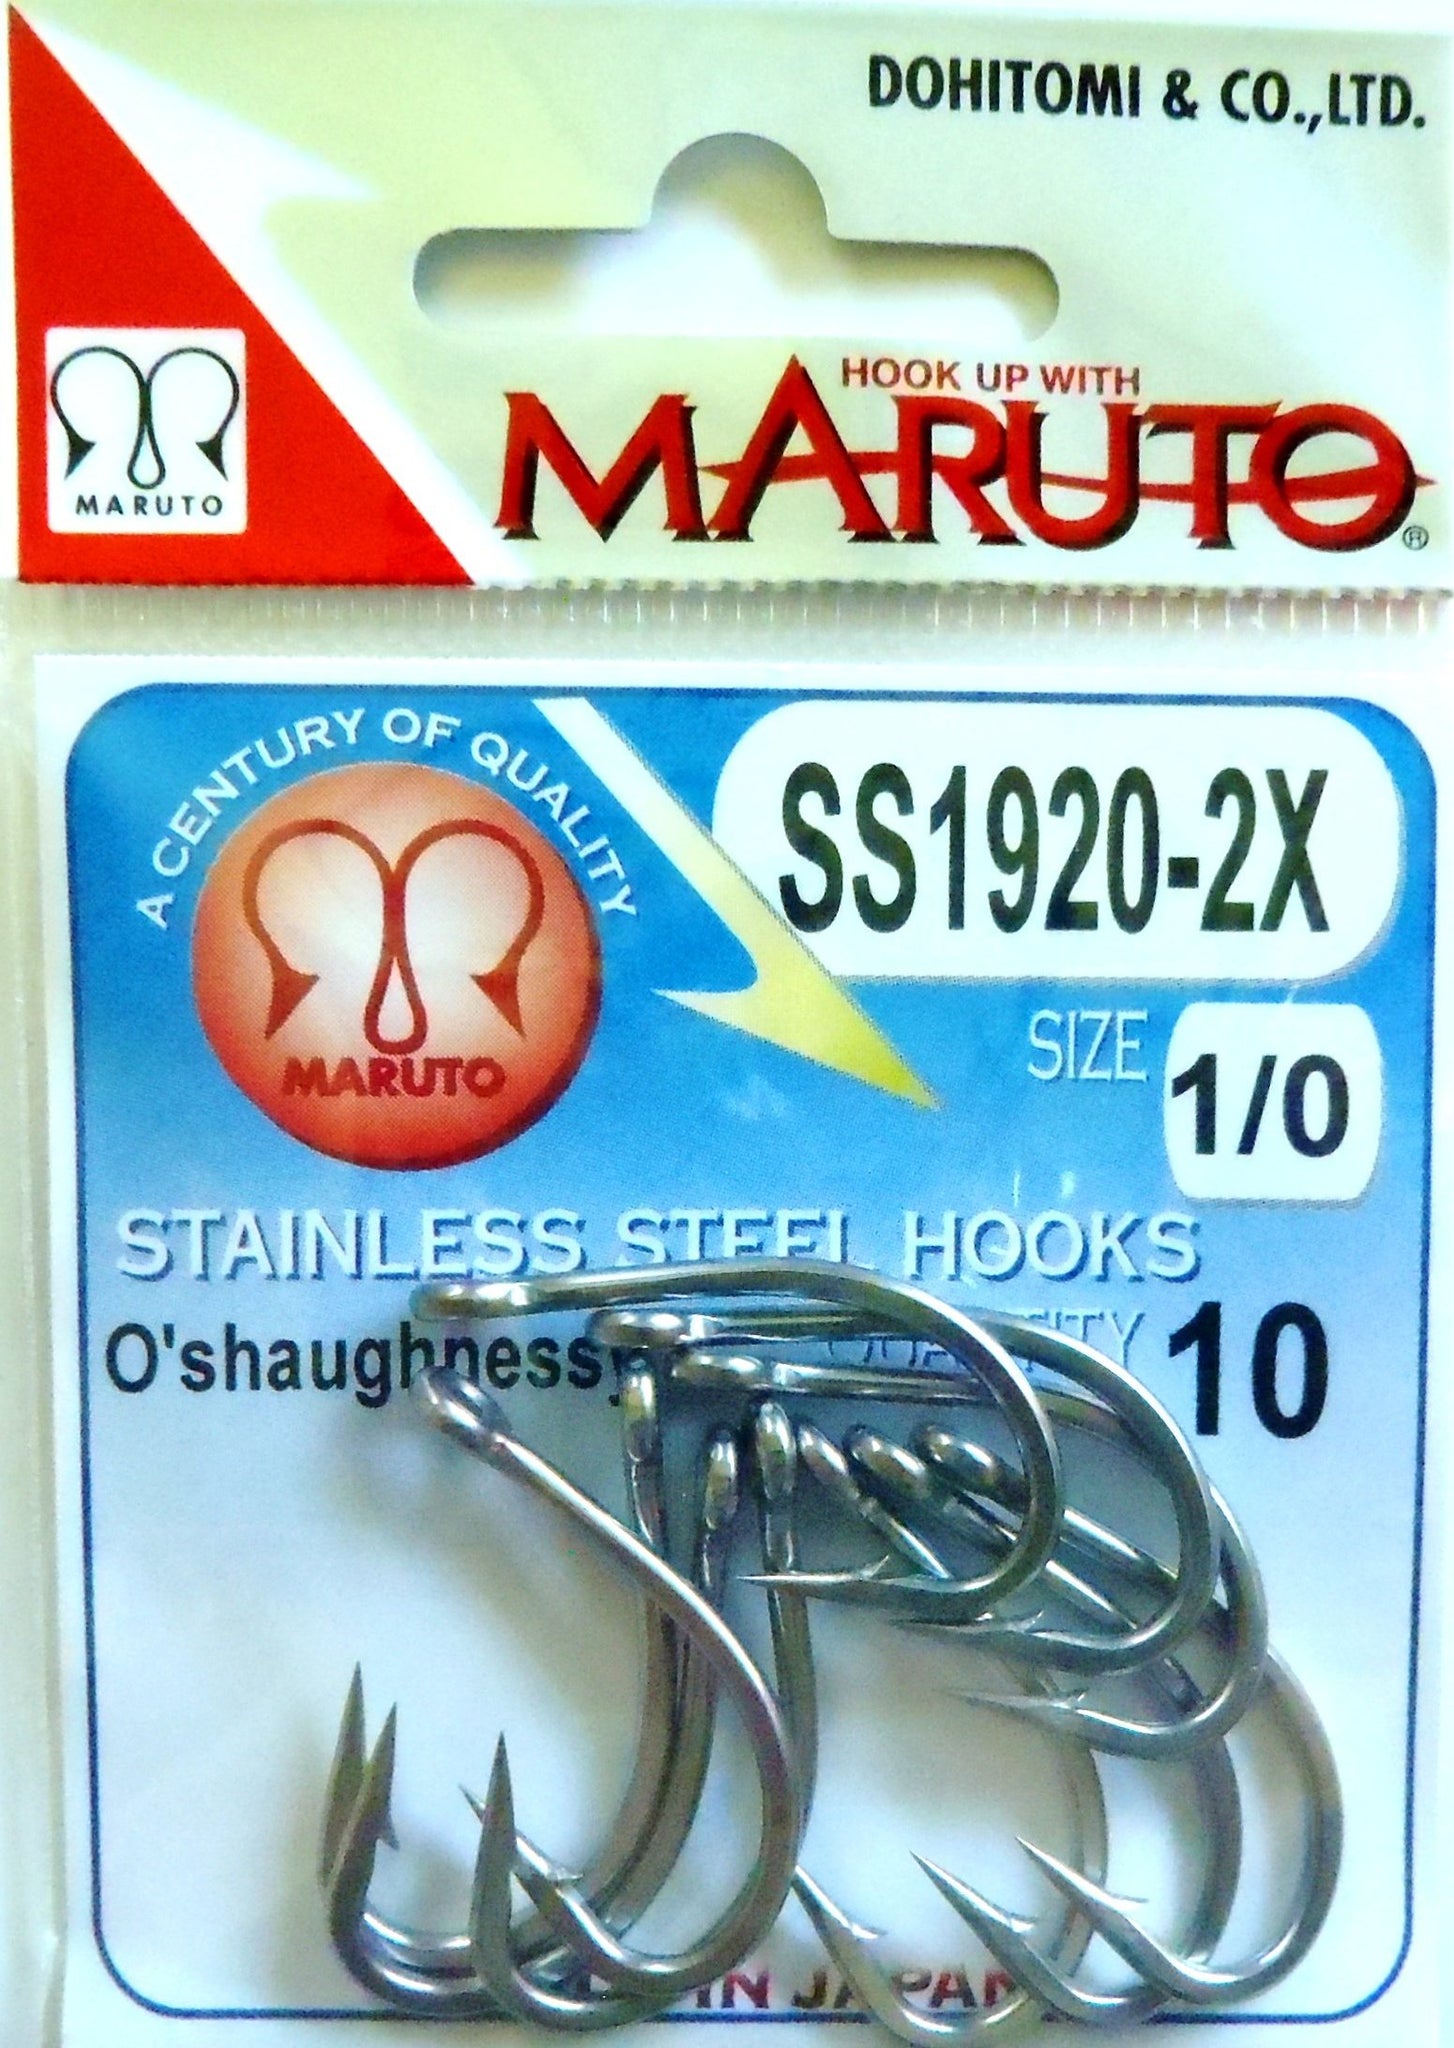 1920-2X Stainless Steel Hook by Maruto Size 4 10 Pack